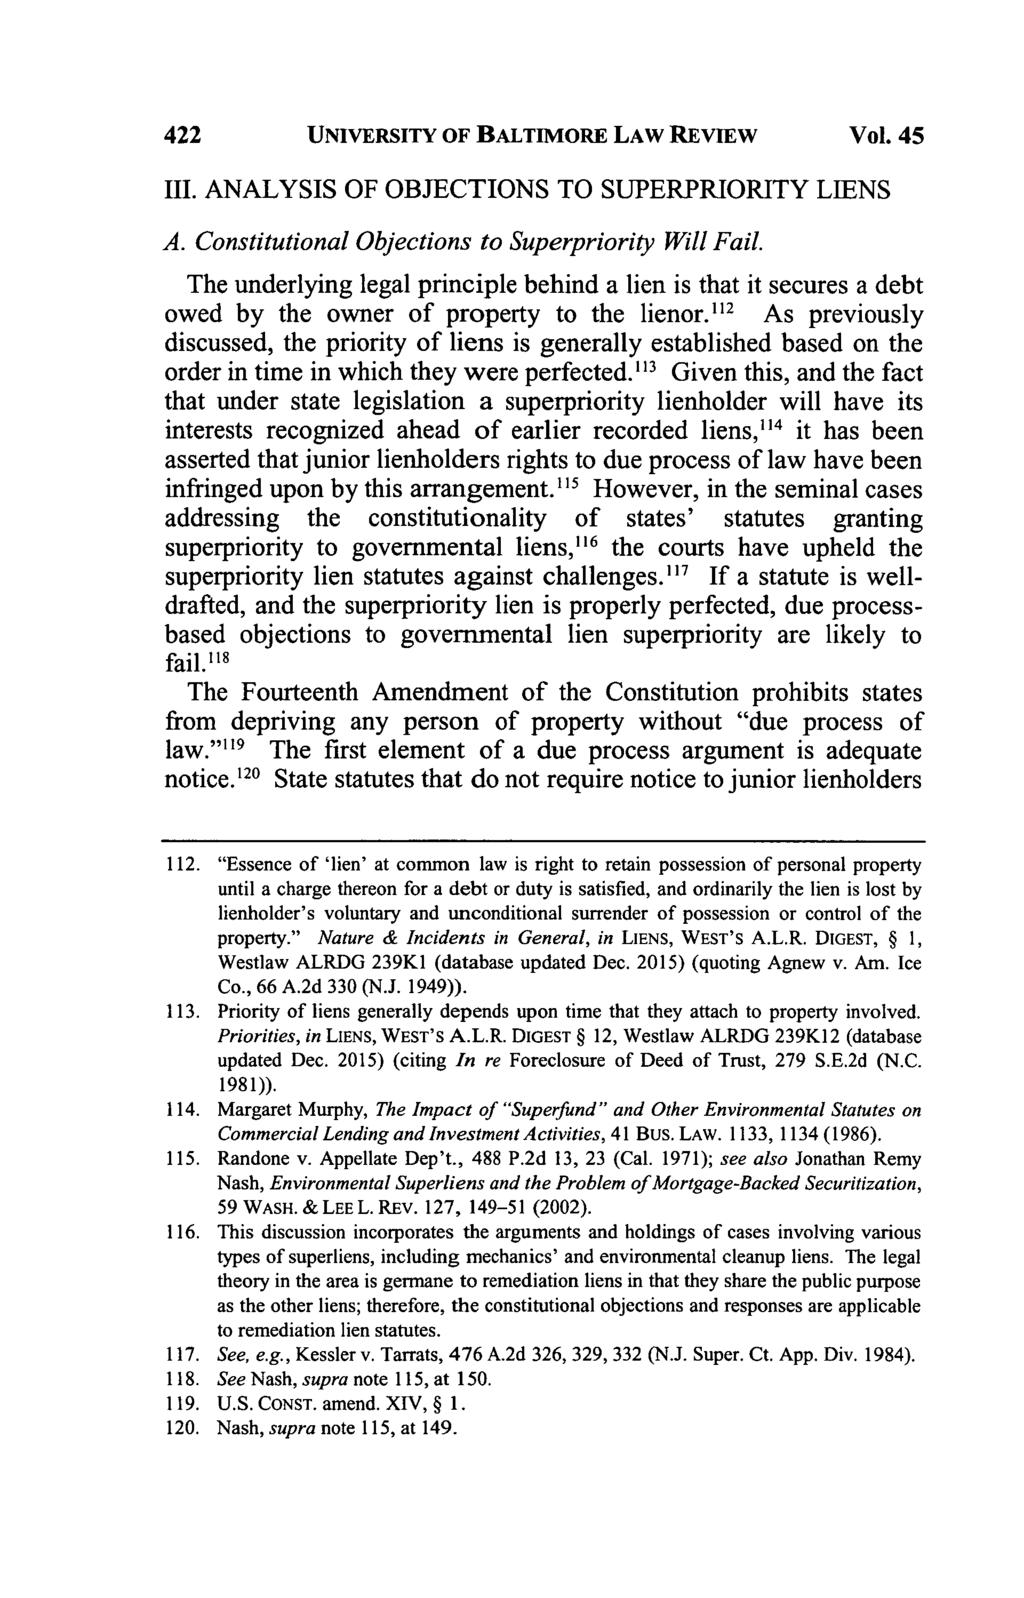 UNIVERSITY OF BALTIMORE LAW REVIEW Vol. 45 III. ANALYSIS OF OBJECTIONS TO SUPERPRIORITY LIENS A. Constitutional Objections to Superpriority Will Fail.